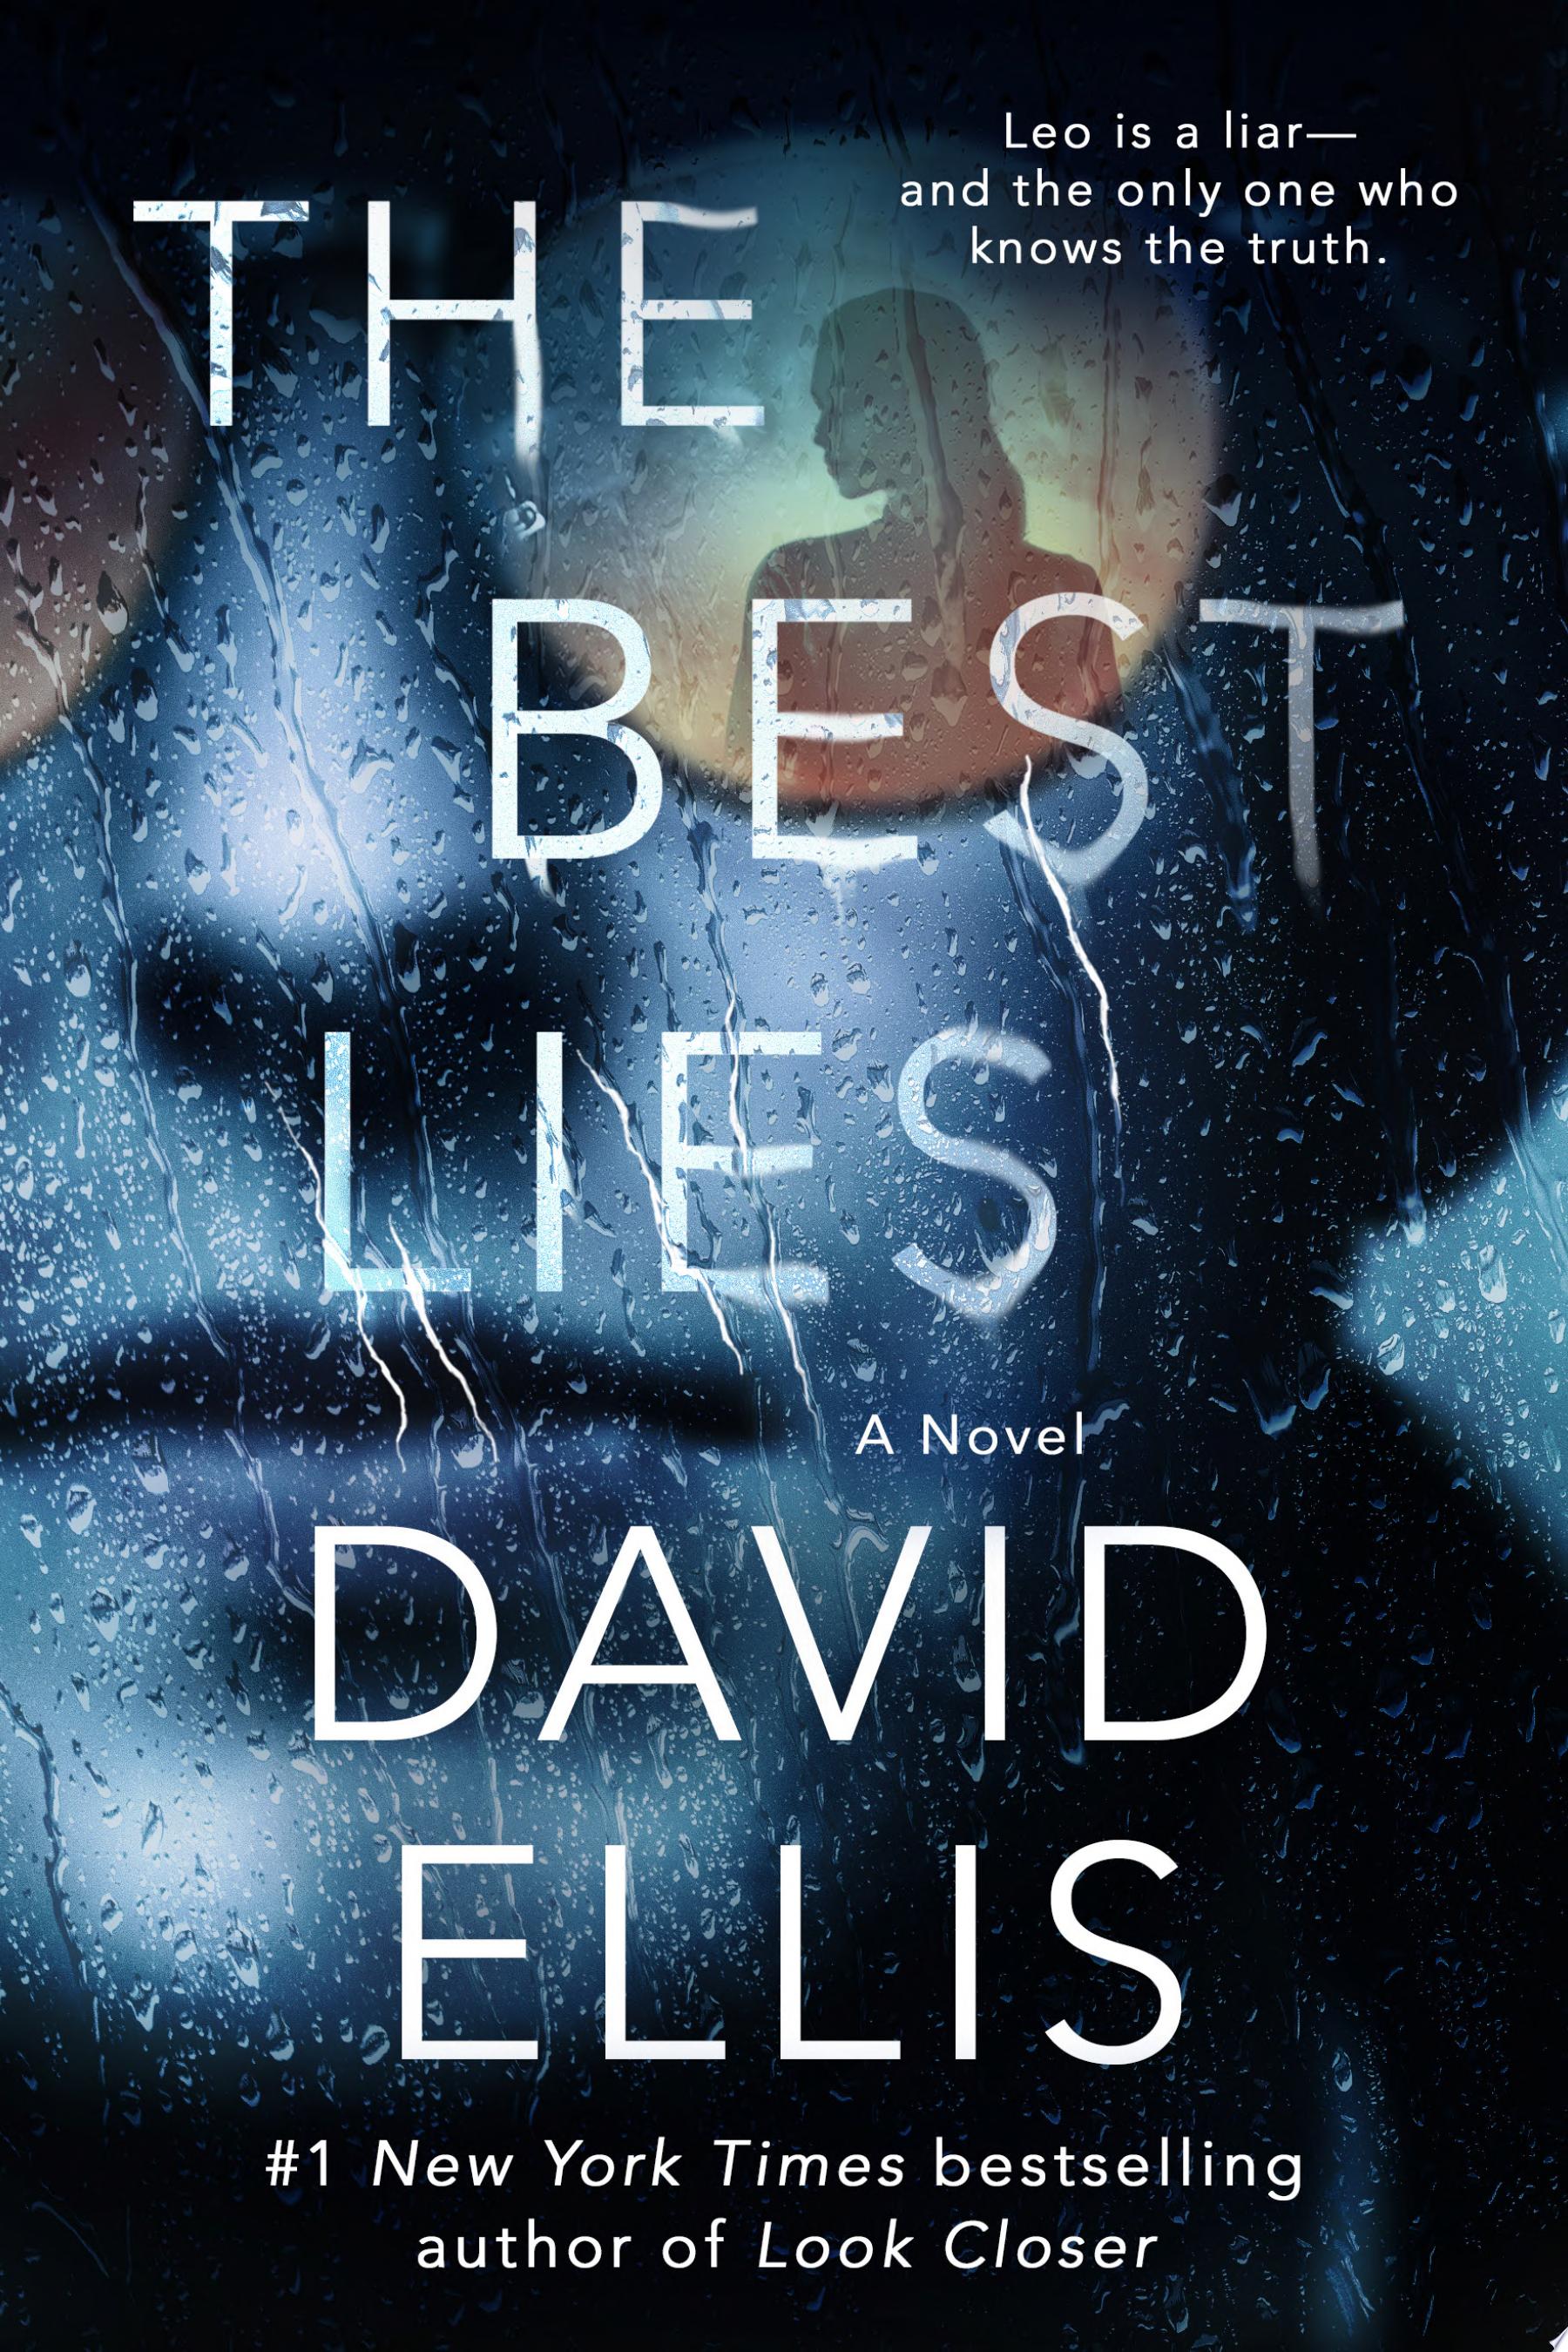 Image for "The Best Lies"